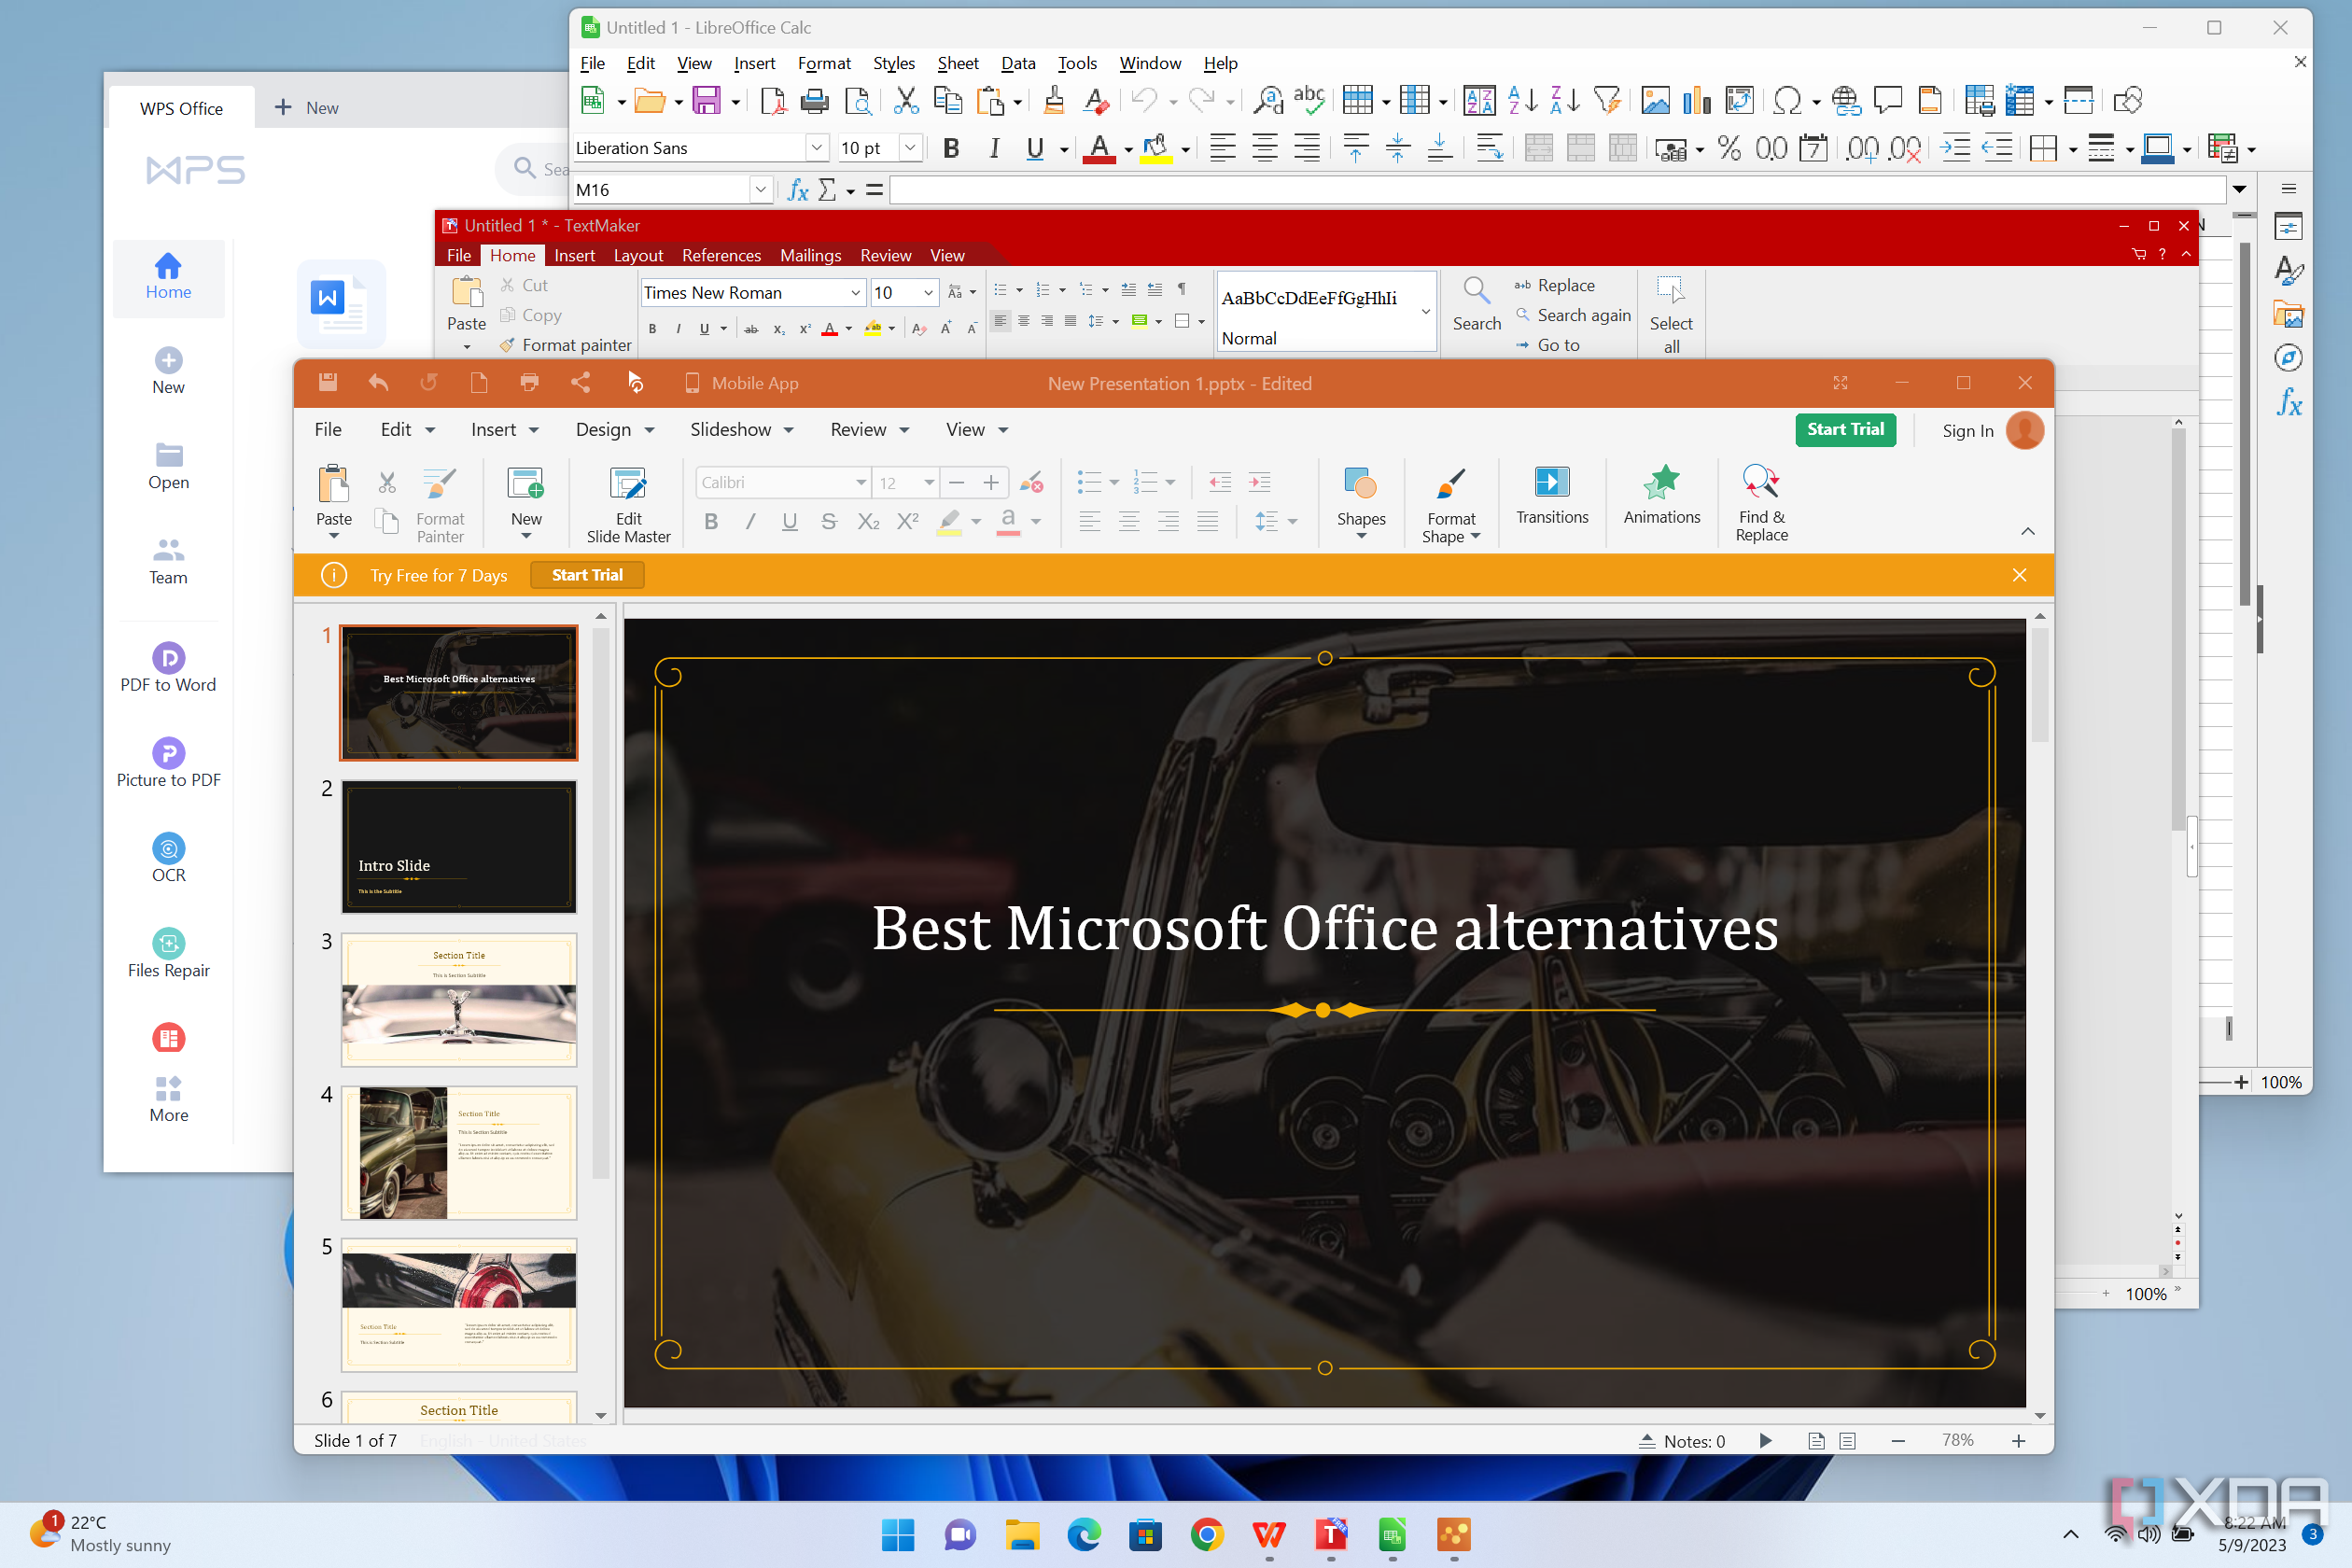 Top Microsoft alternatives for students in 2023